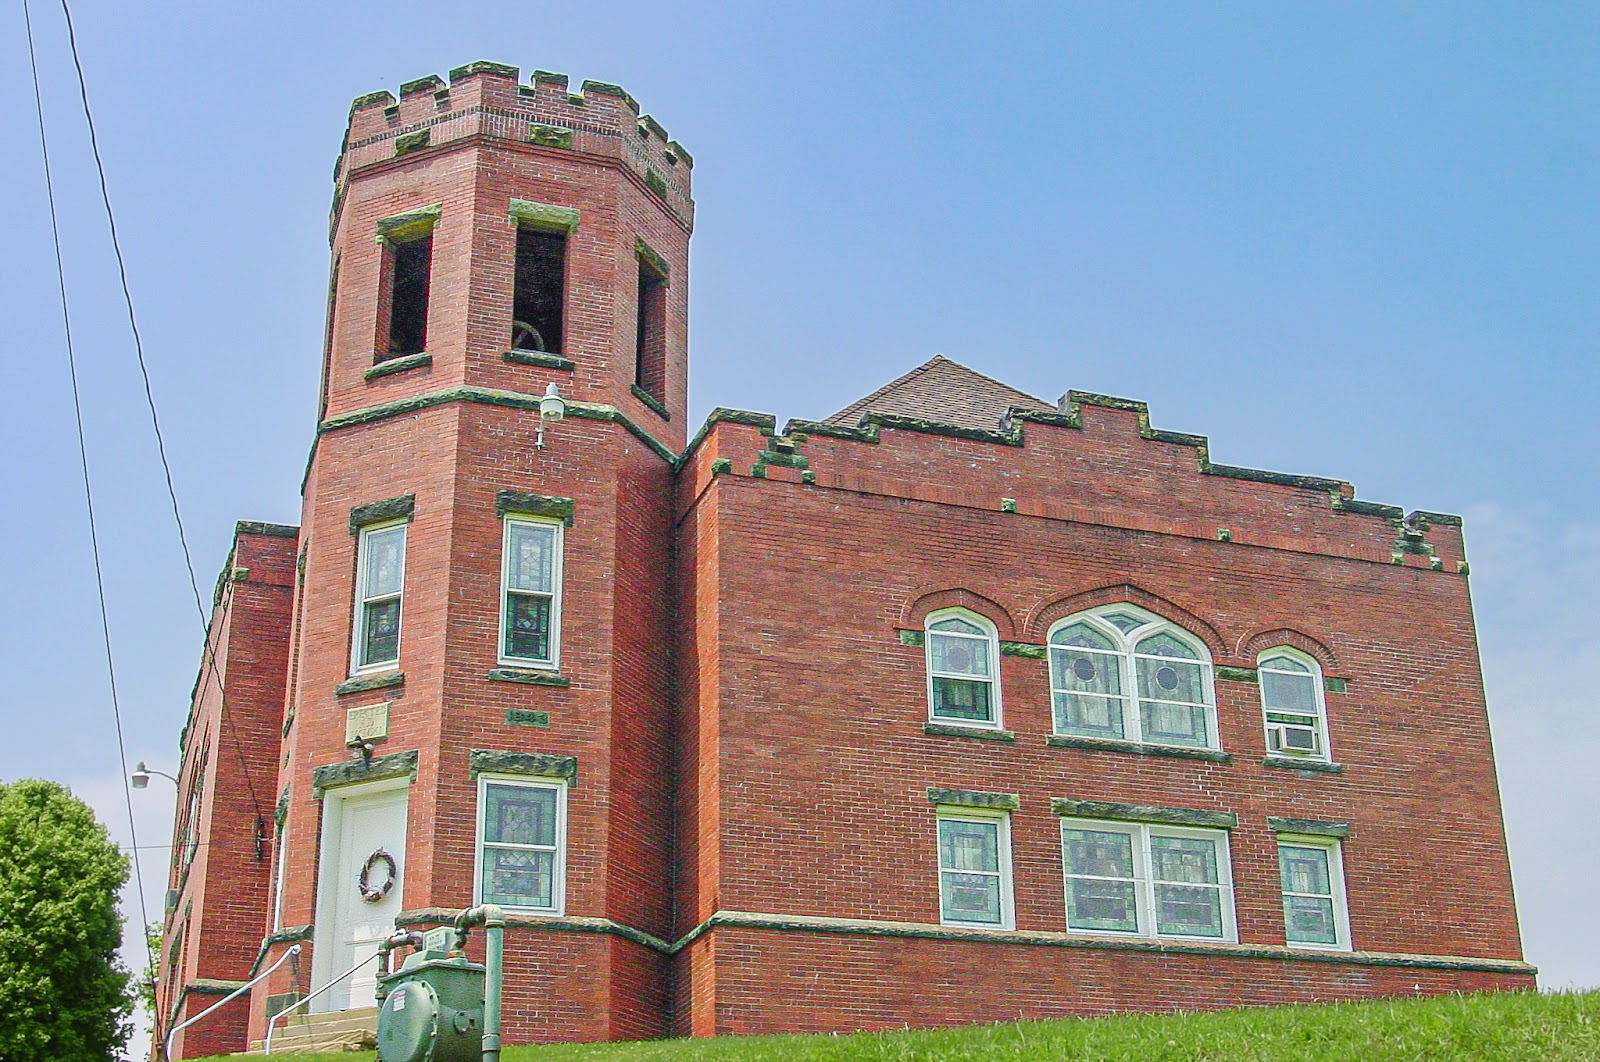 A red brick 3-story building with a round turret